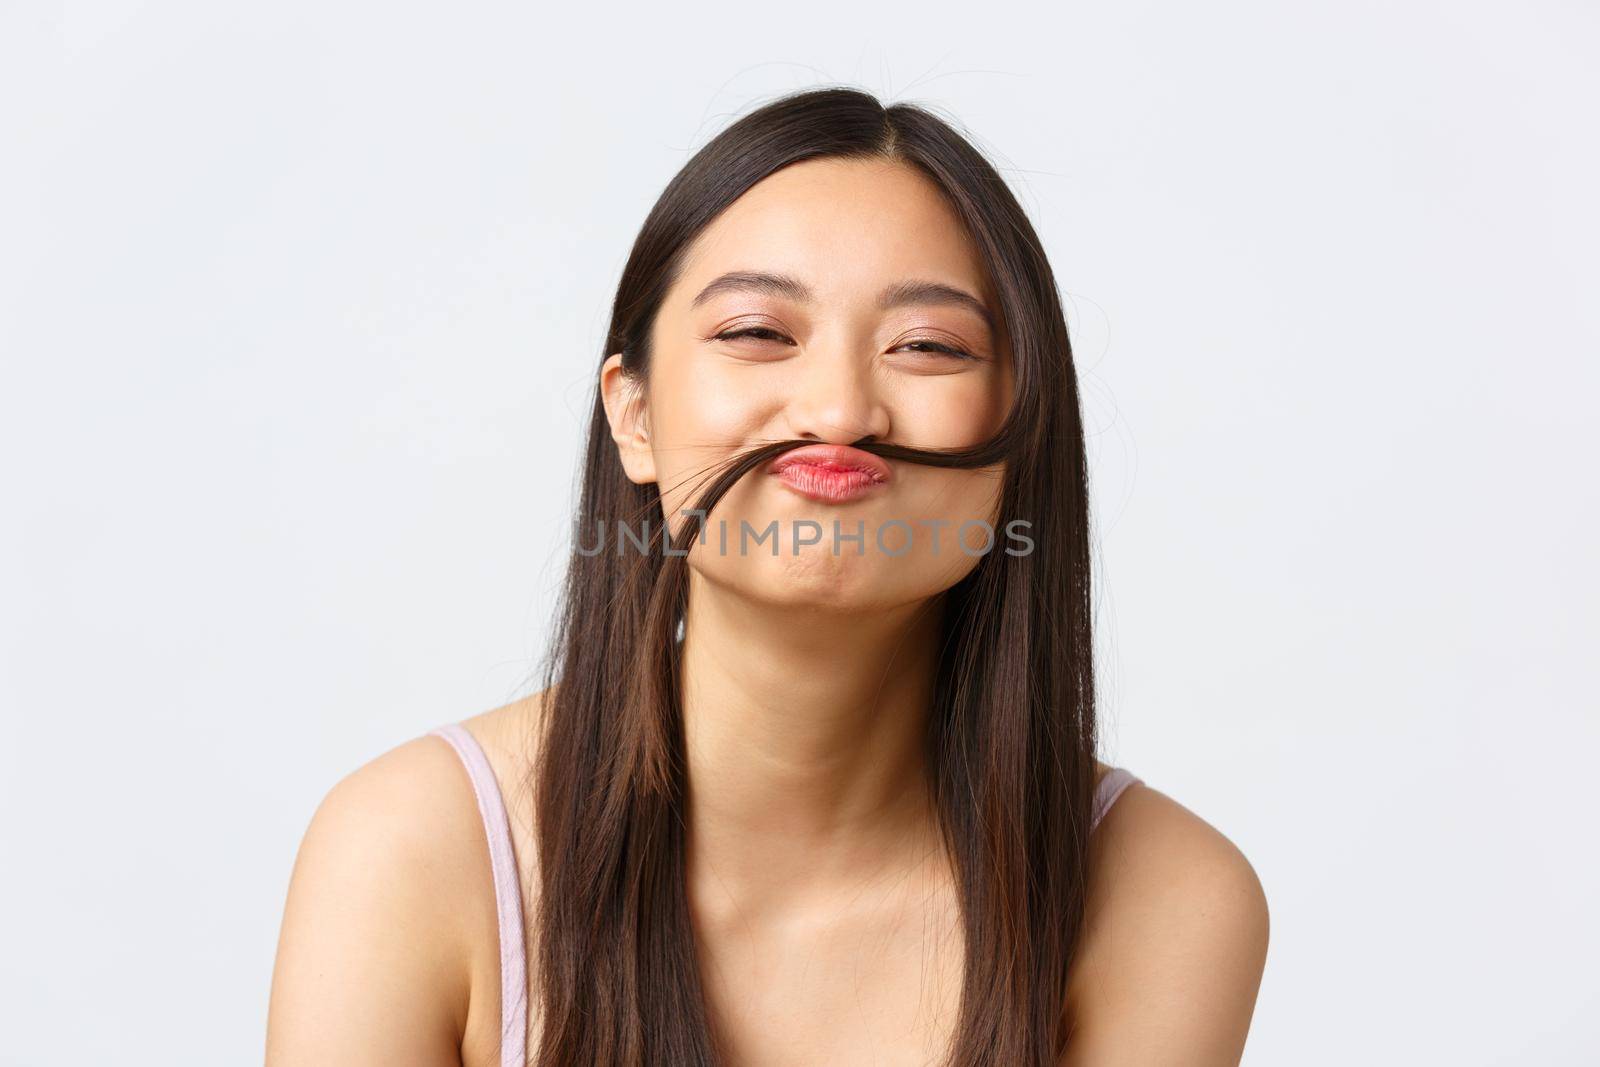 Concept of beauty, fashion and makeup products advertisement. Close-up portrait of happy silly asian girl making fake moustache out of hair strand, smiling cheerful, white background.